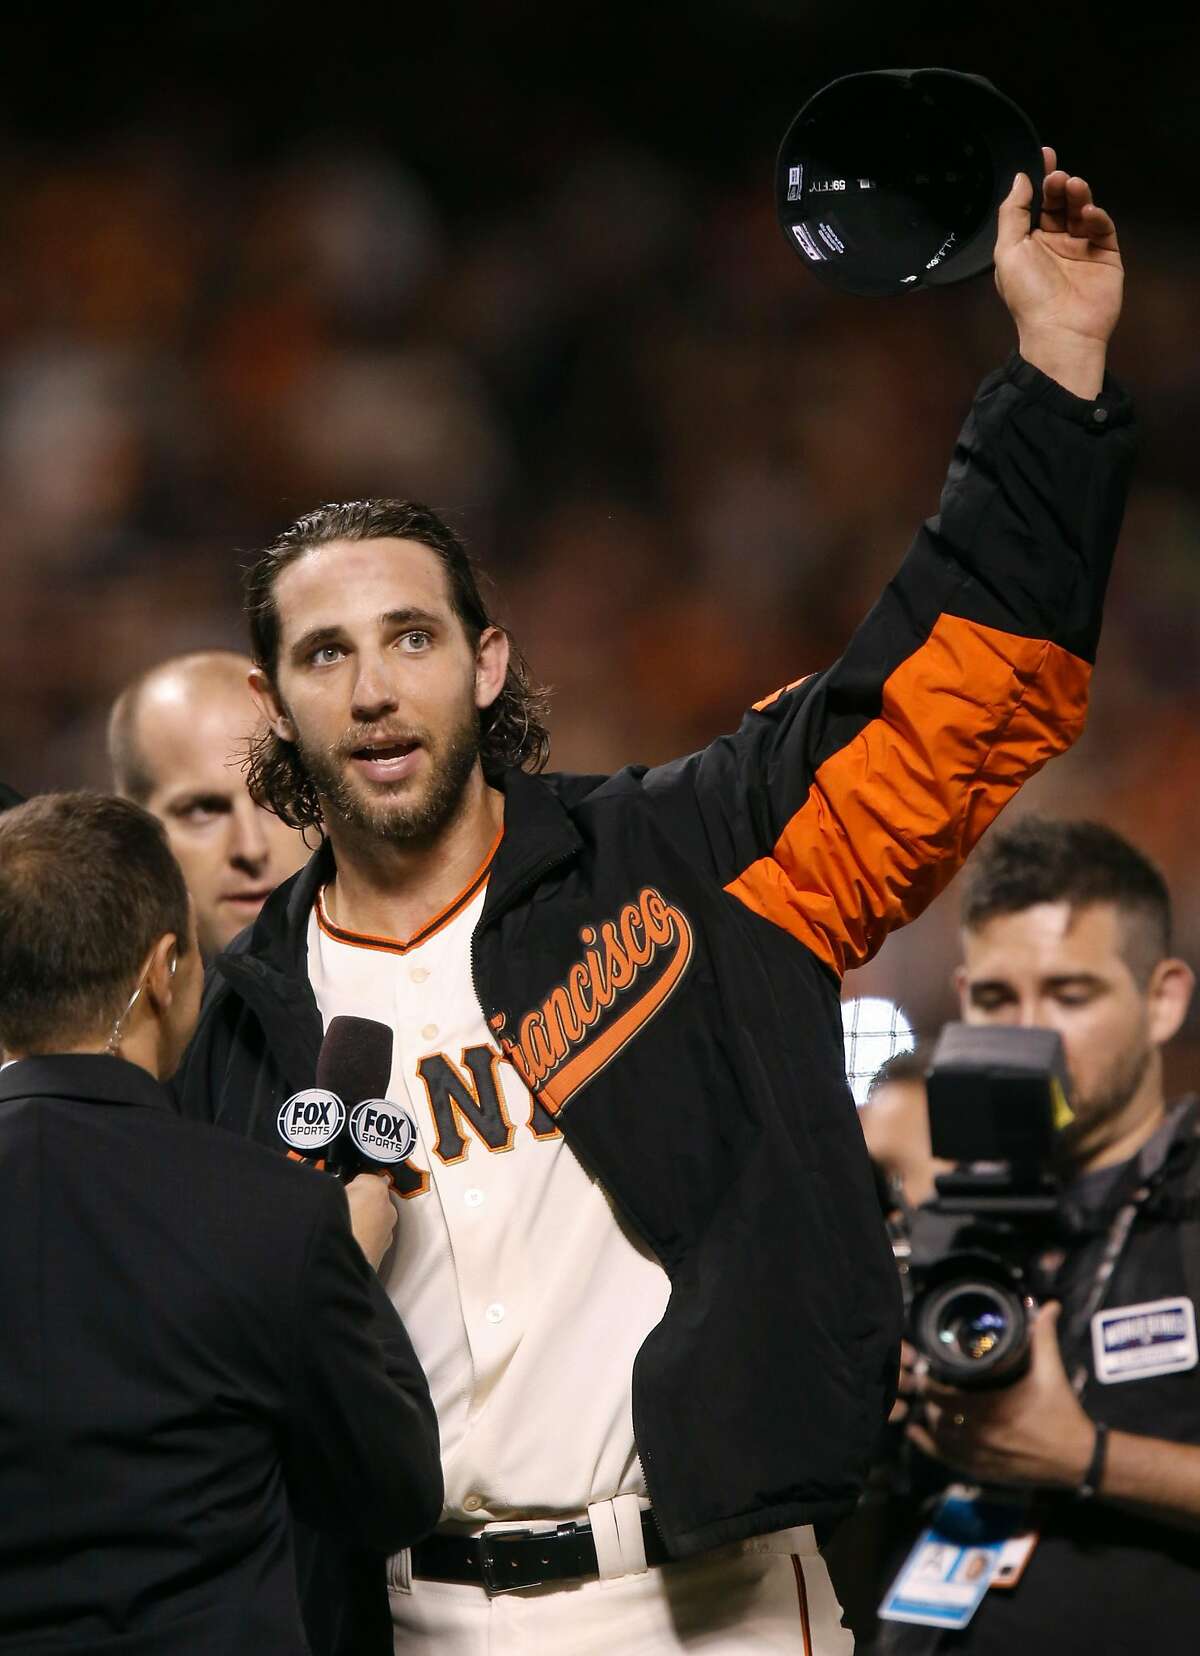 Giants Madison Bumgarner waves to the crowd after his winning 5 to 0 performance over the Kansas City Royals in Game 5 of the World Series at AT&T Park on Sunday, Oct. 26, 2014 in San Francisco, Calif.